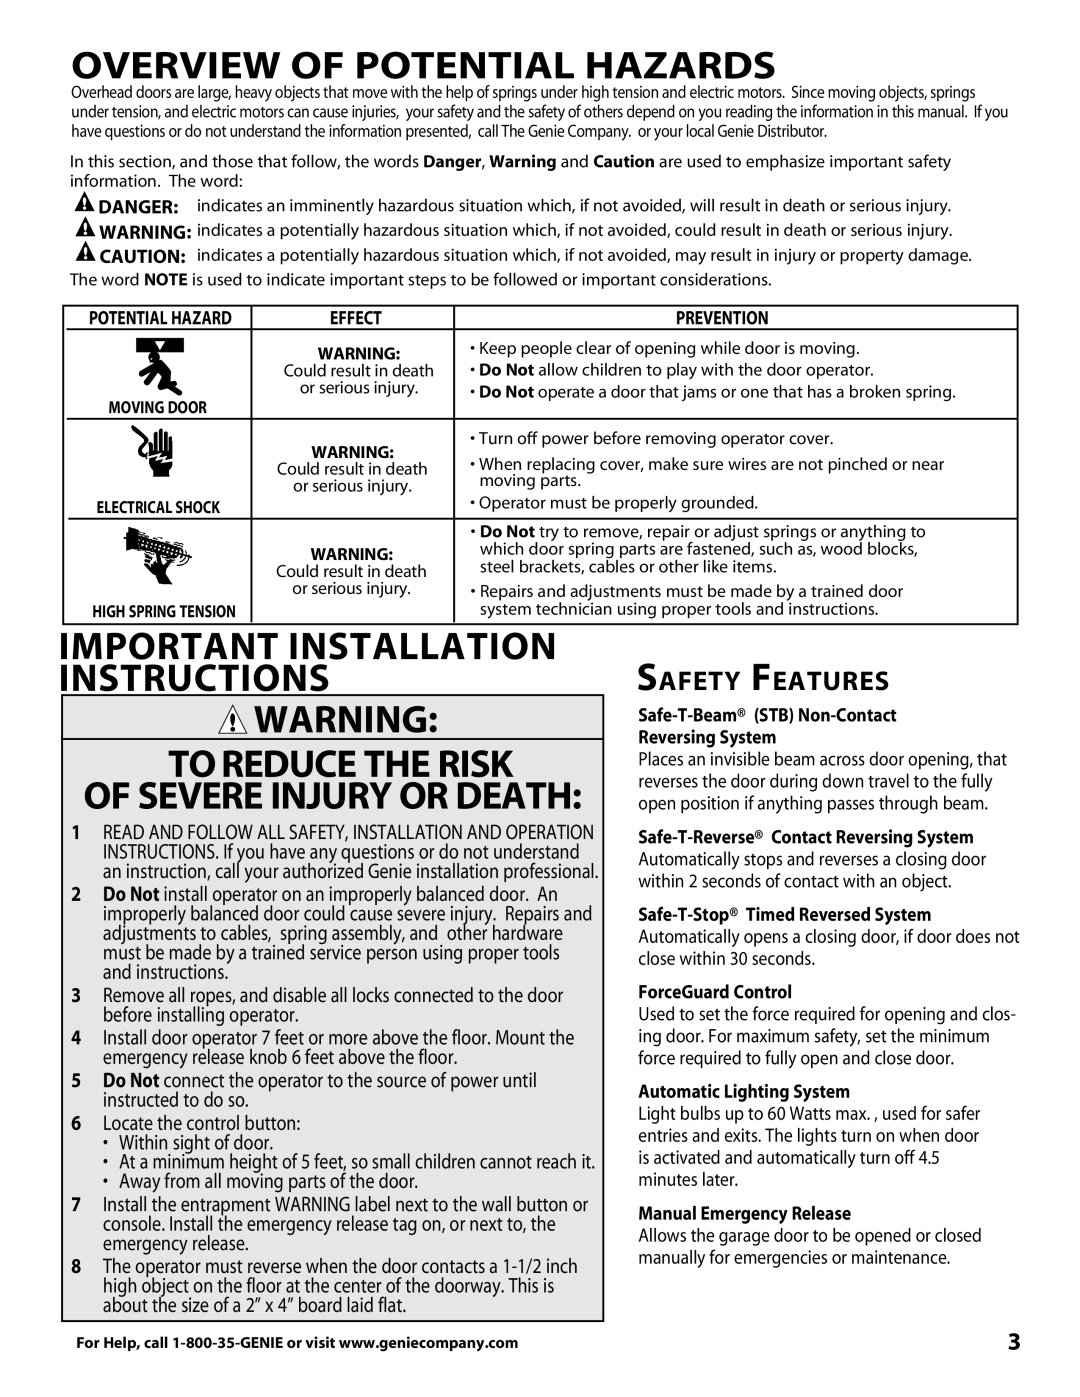 Genie 3681036666 Overview Of Potential Hazards, Important ­Installation Instructions, Safety Features, and instructions­ 